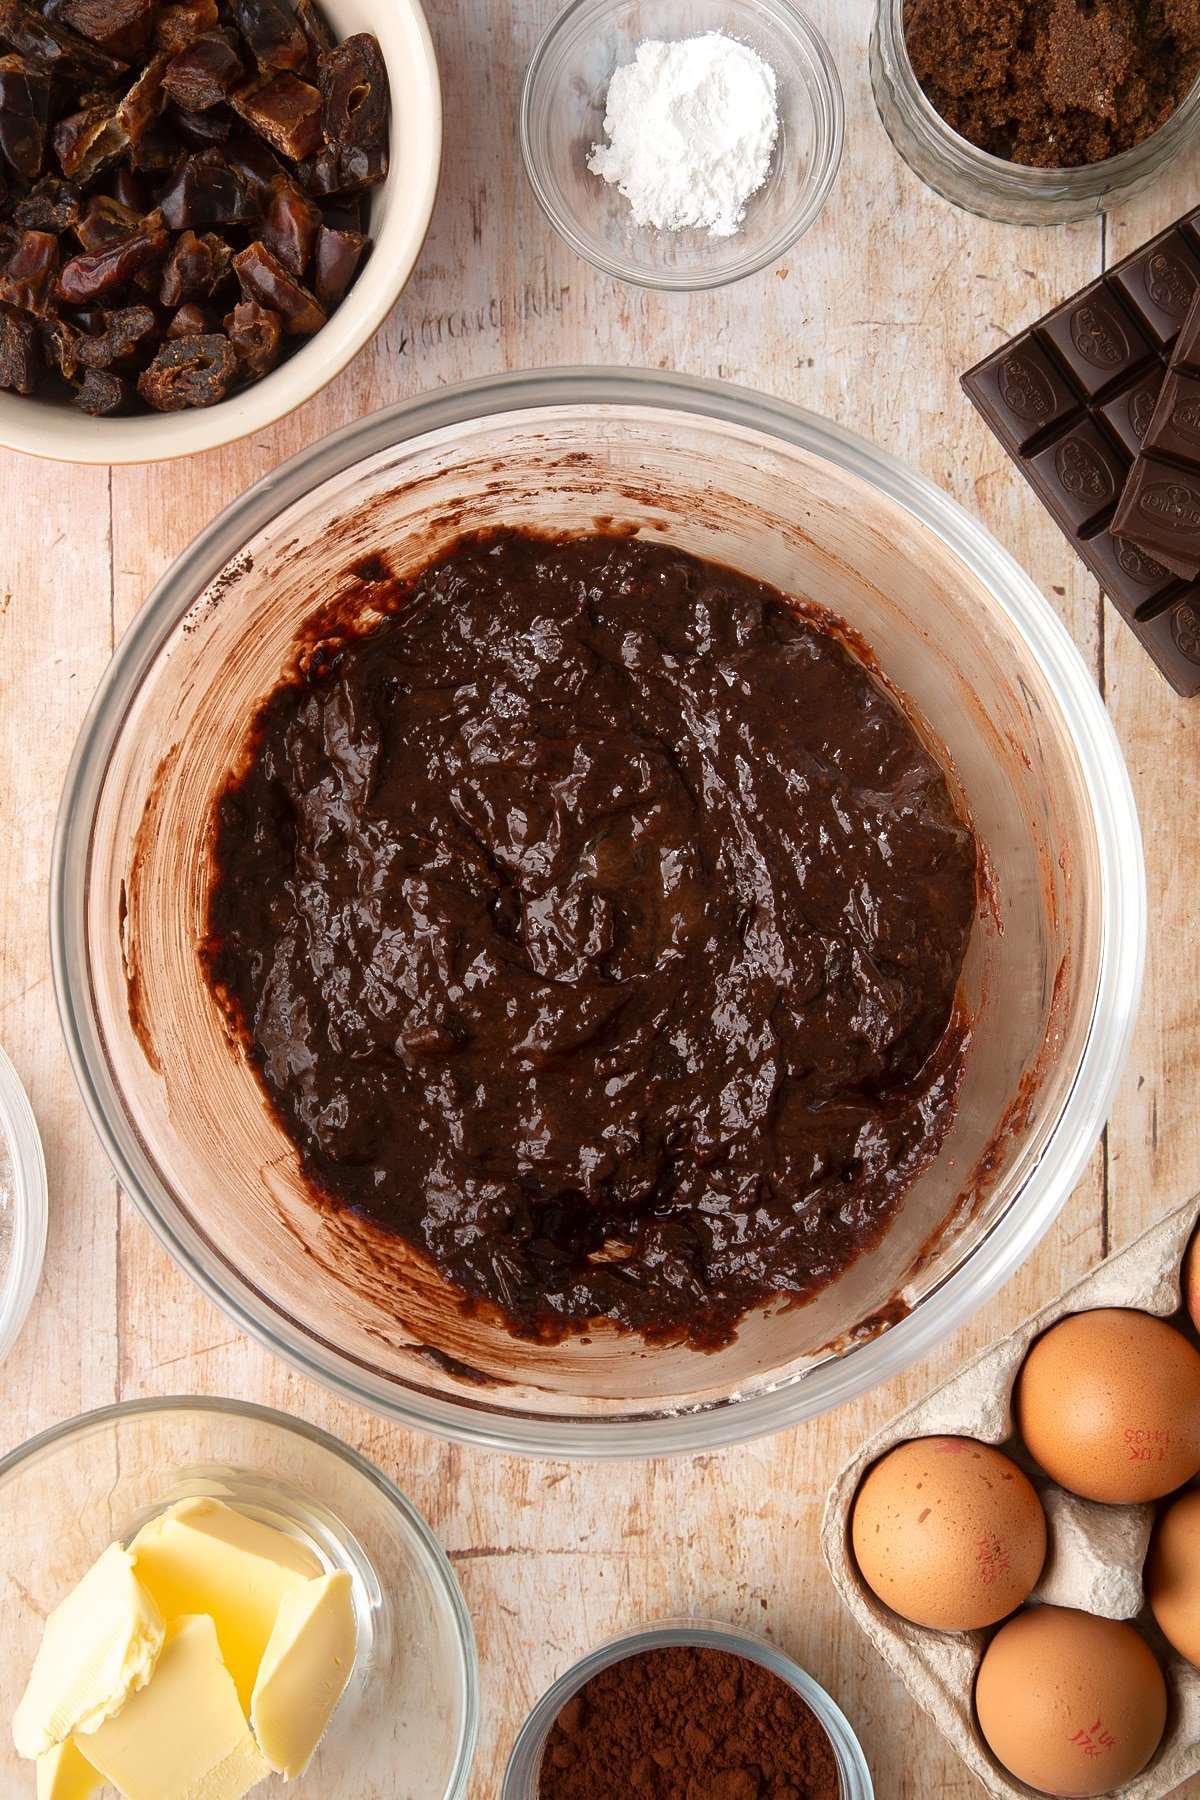 A mixing bowl containing whole grain brownie batter. Ingredients to make whole grain brownies surround the bowl.